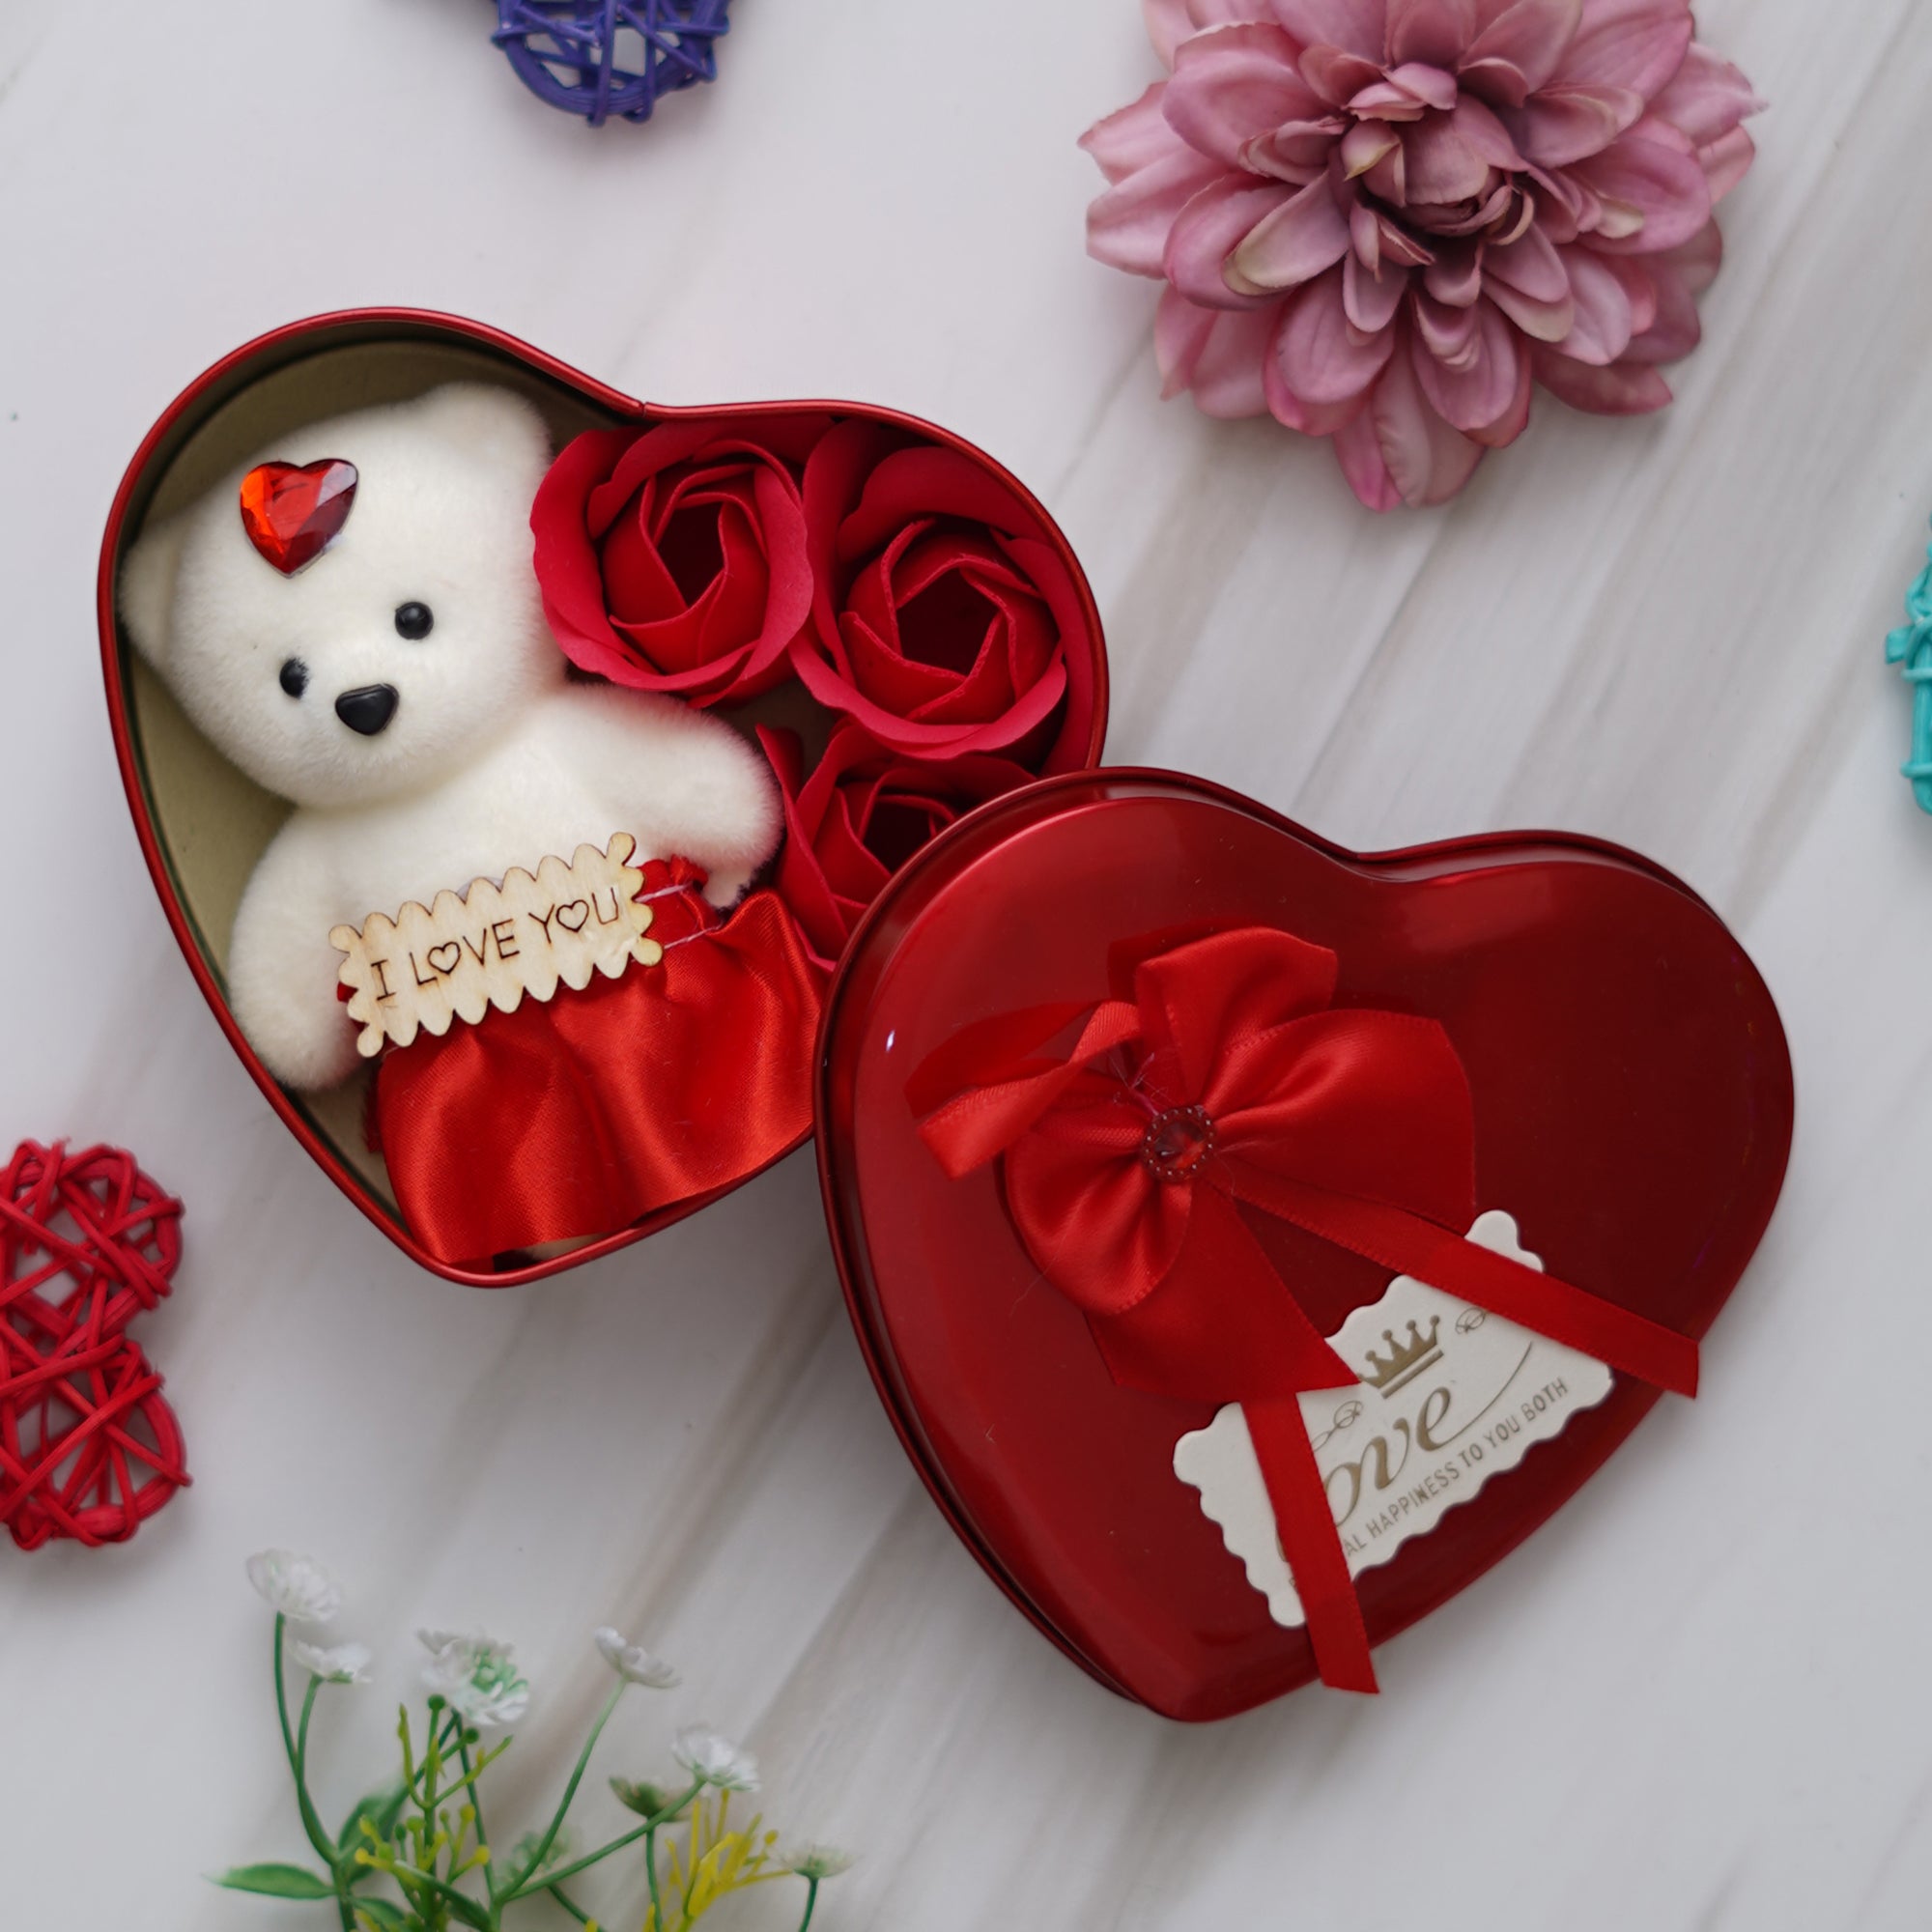 Valentine Combo of Golden Rose Gift Set, Heart Shaped Gift Box Set with White Teddy and Red Roses 3